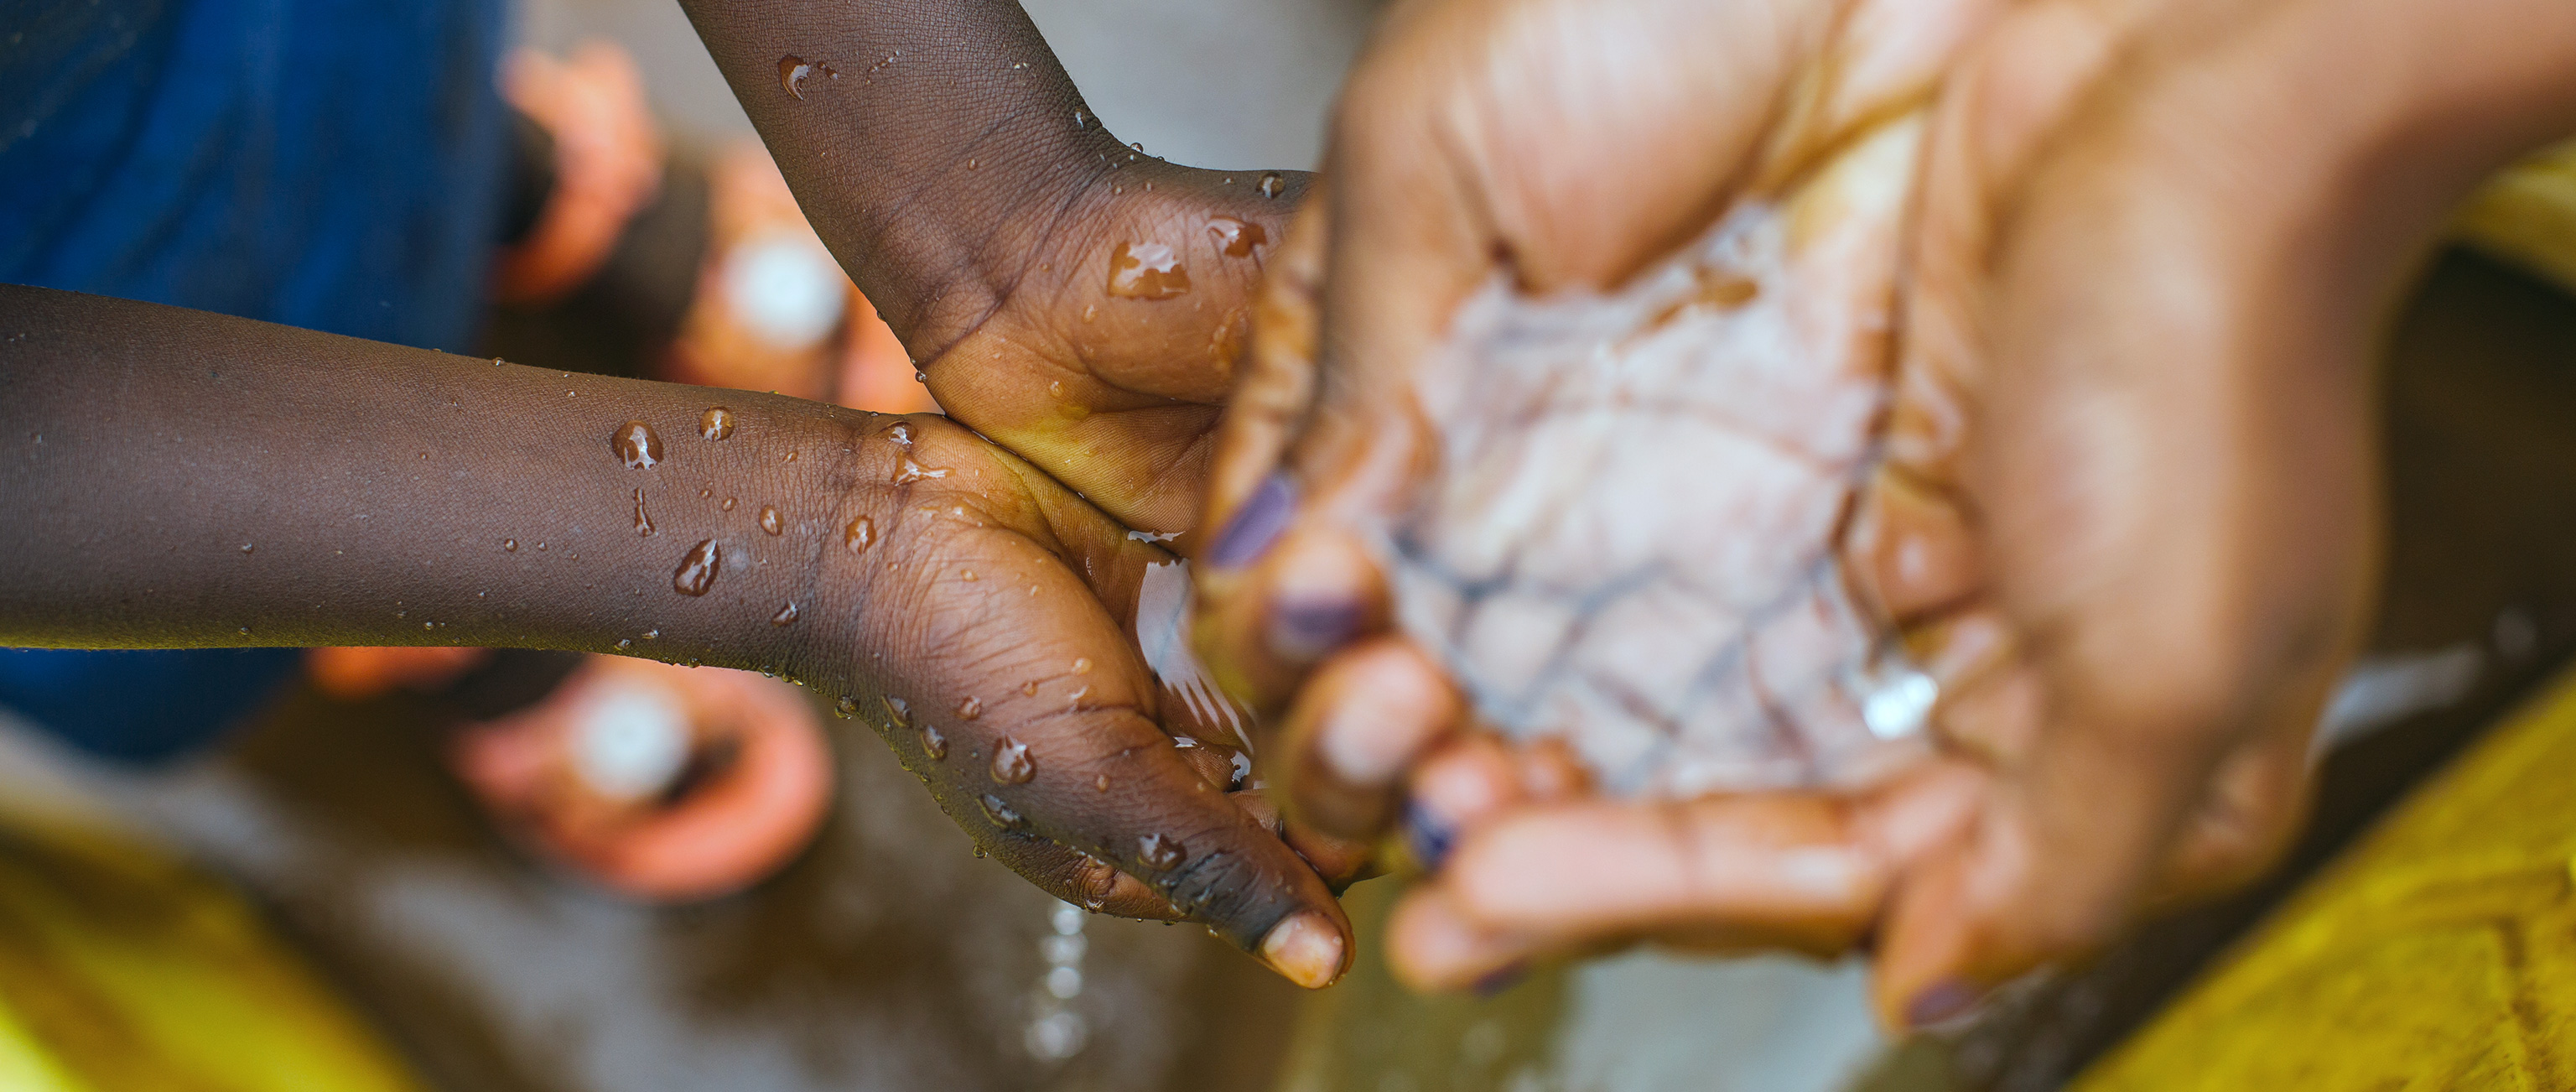 Why Water and Sanitation are the Foundation for Sustainable Development